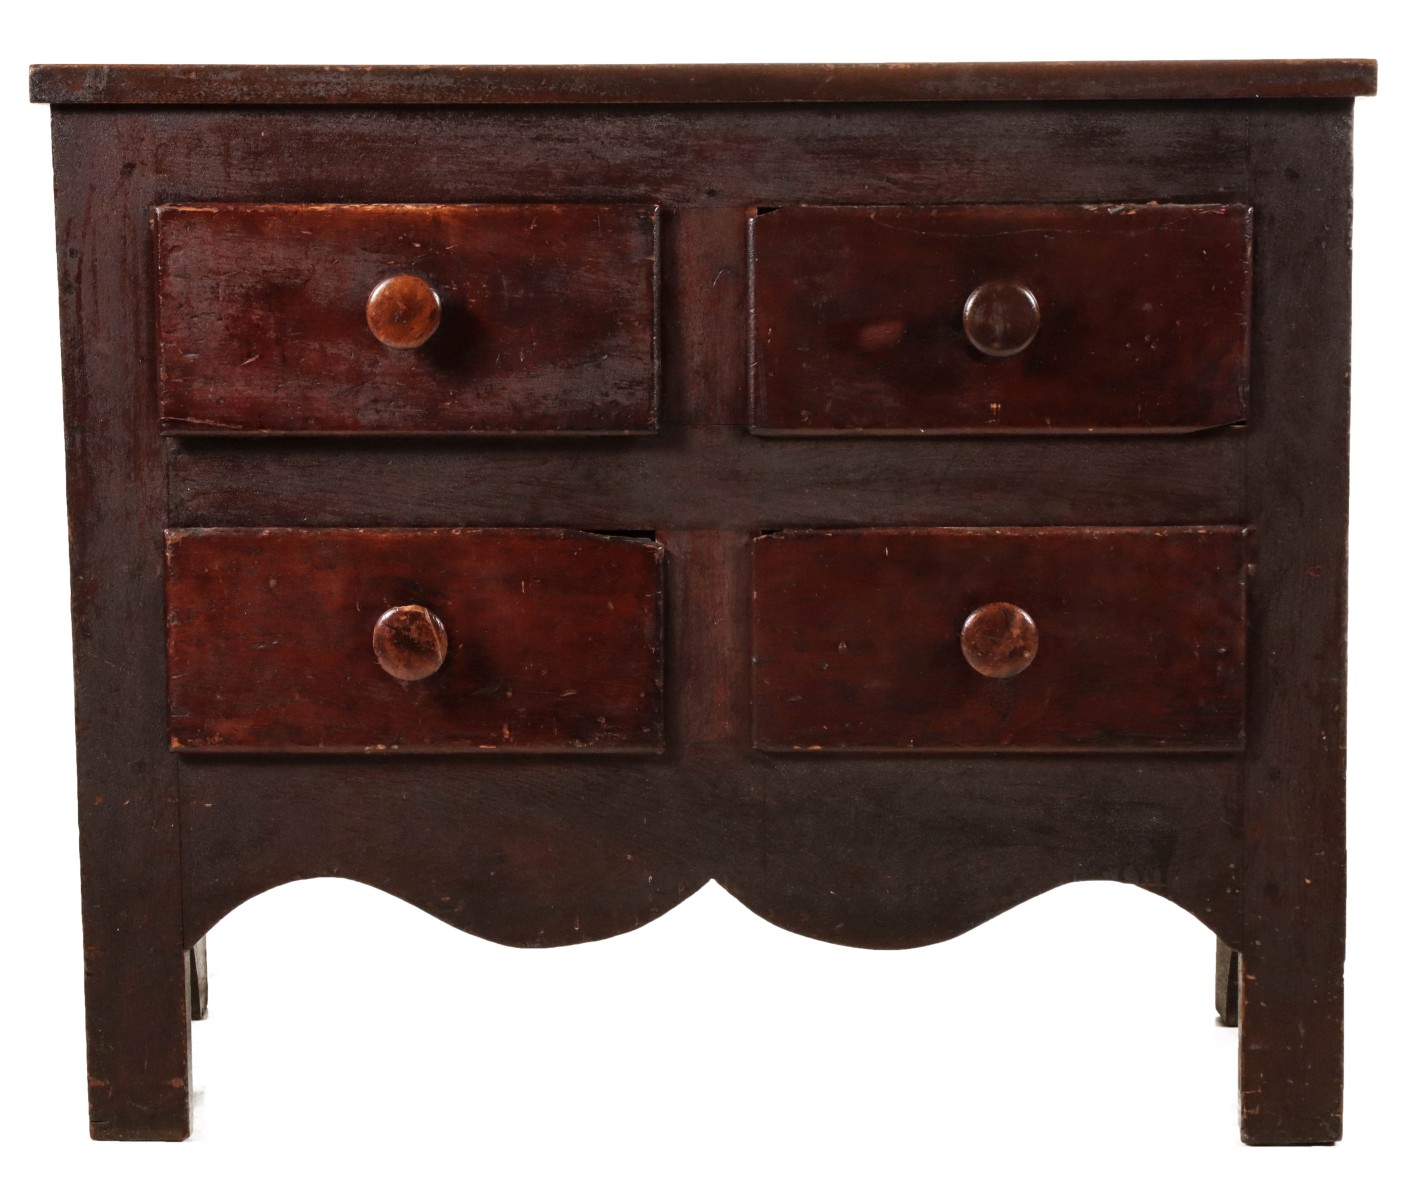 AN INTERESTING MIDWESTERN FOUR DRAWER WALNUT CABINET